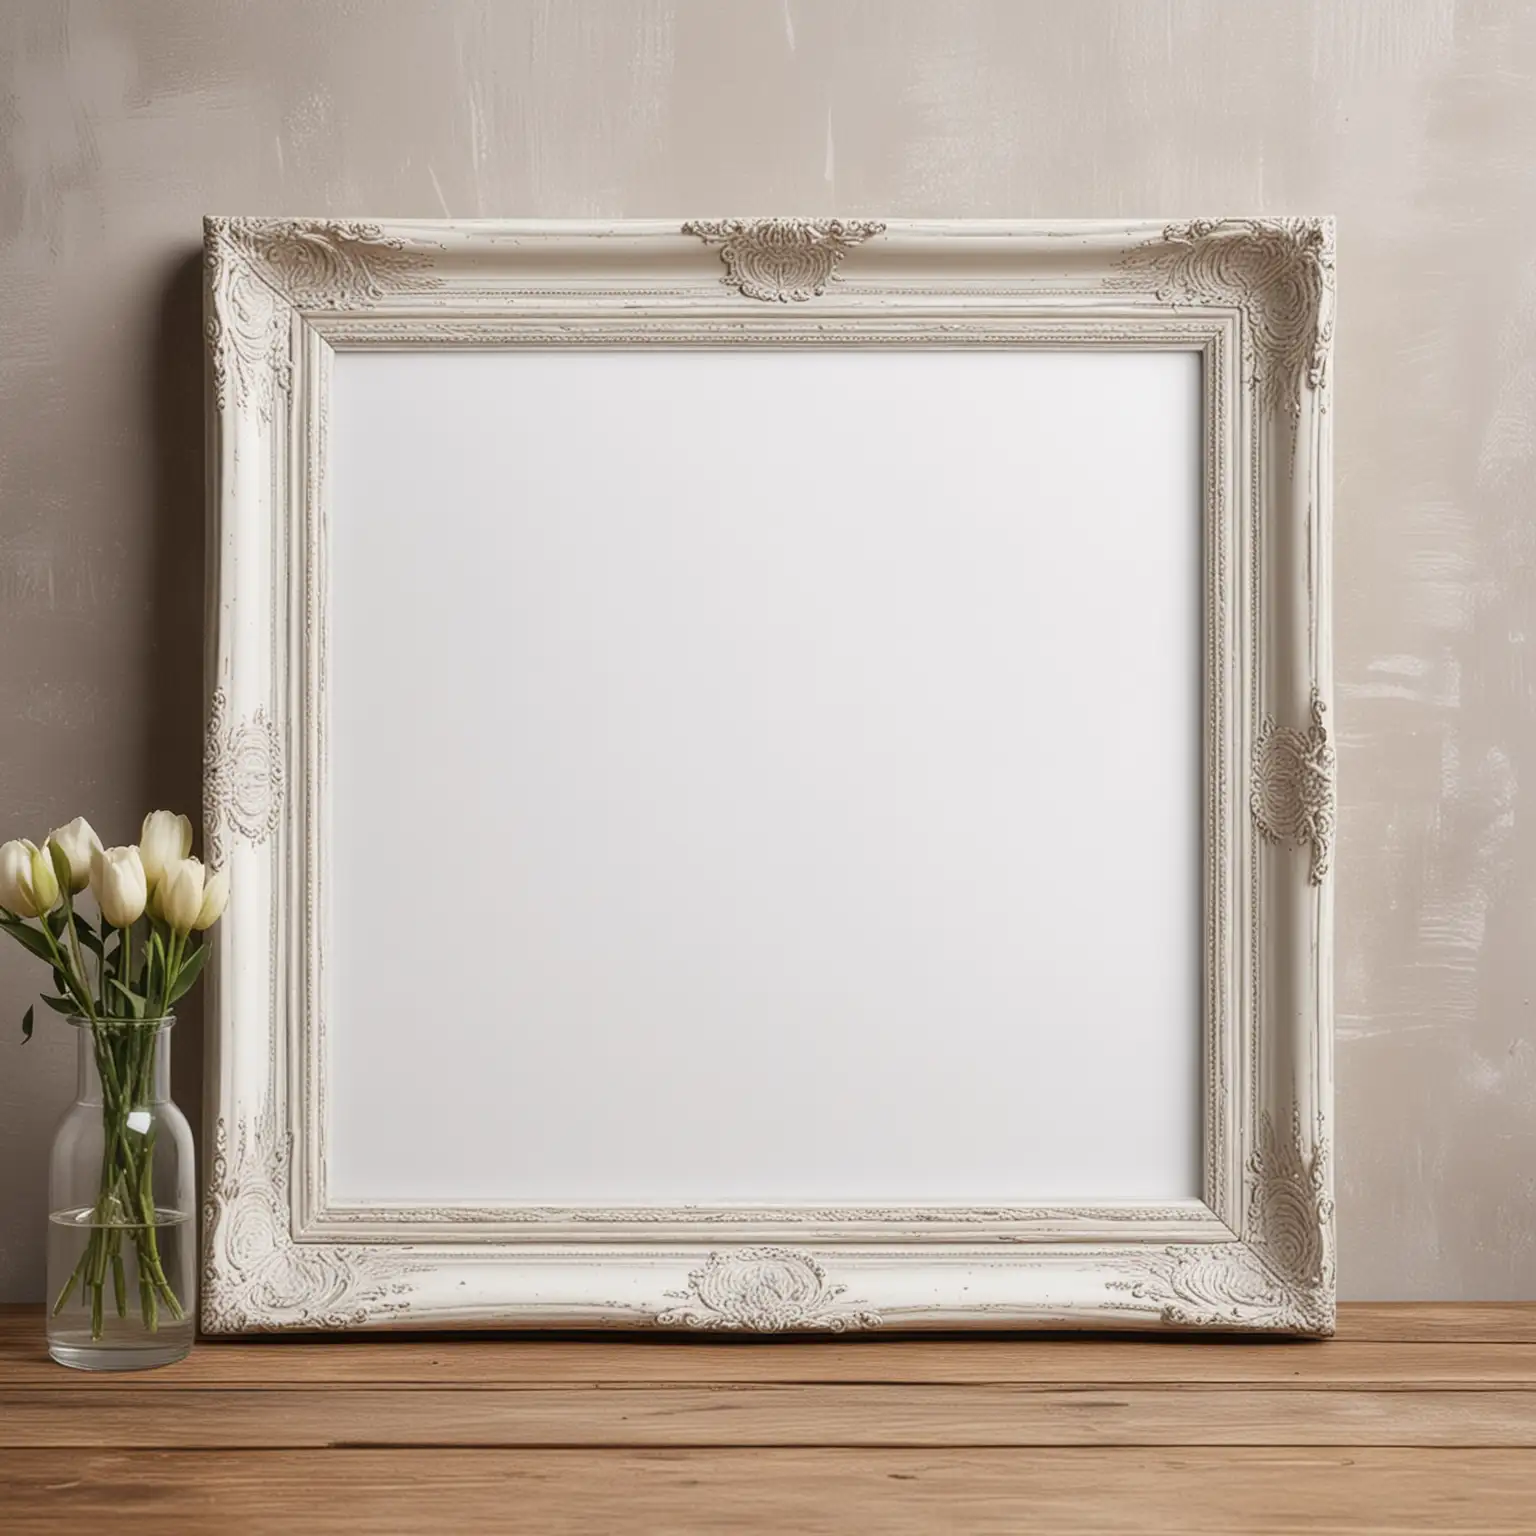 Artistic Vintage Picture Frame with Pristine Blank Canvas